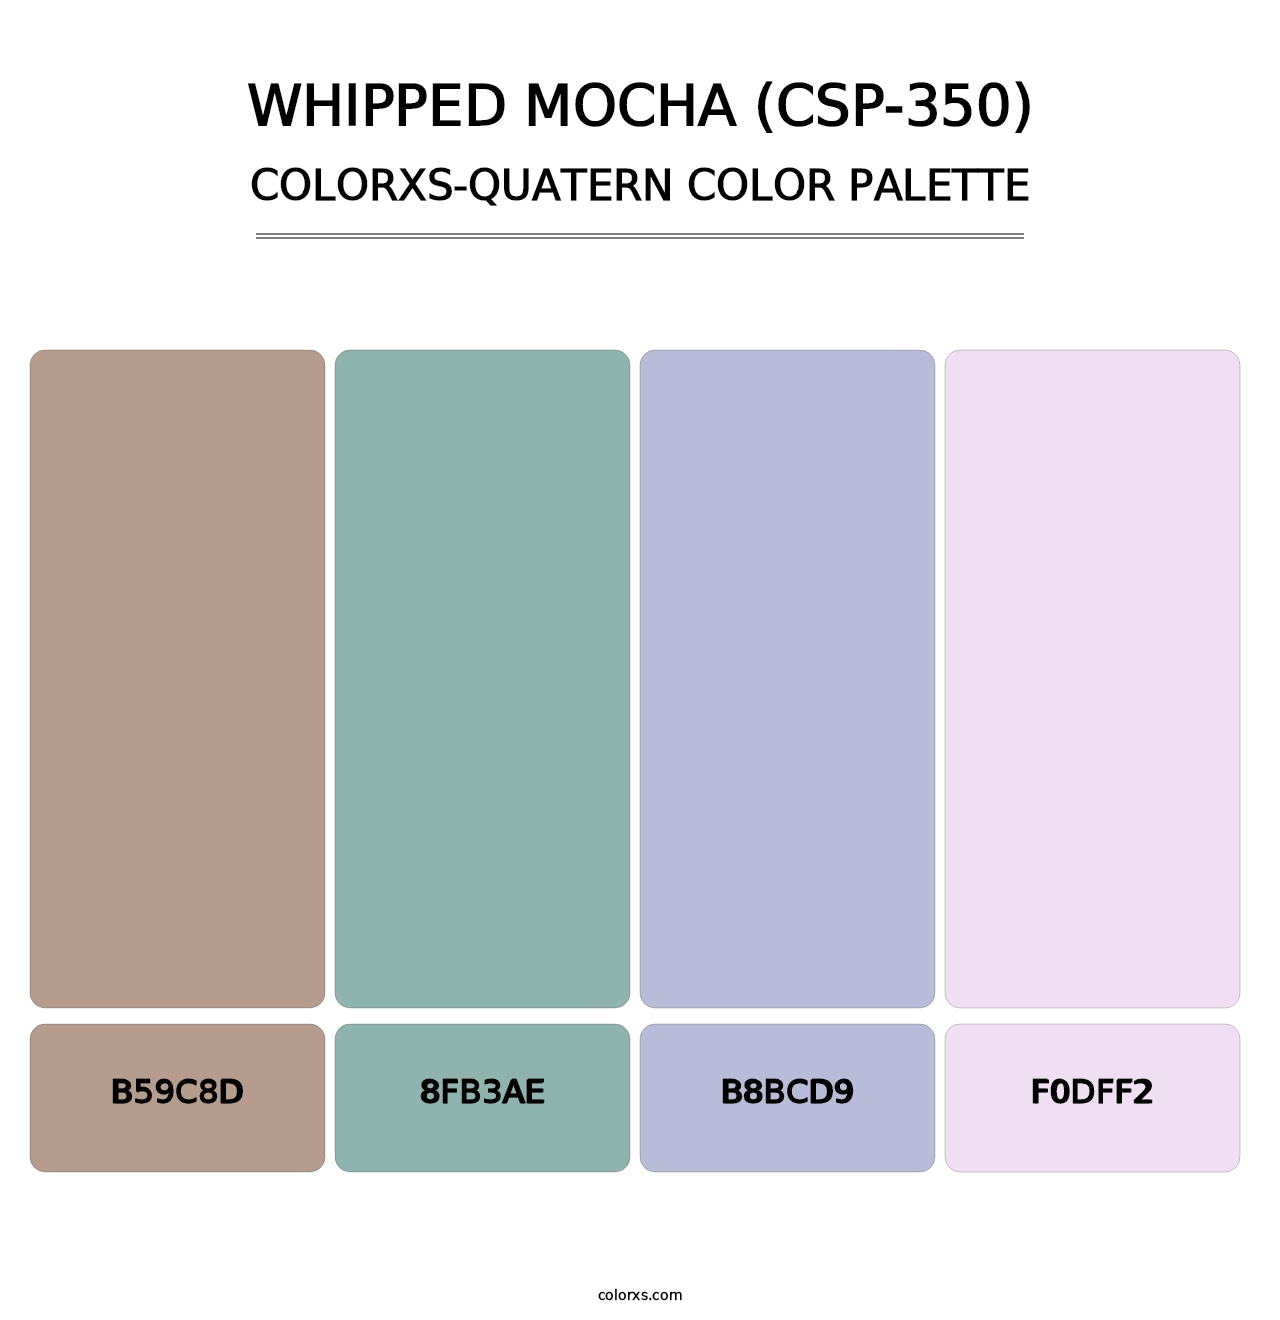 Whipped Mocha (CSP-350) - Colorxs Quatern Palette